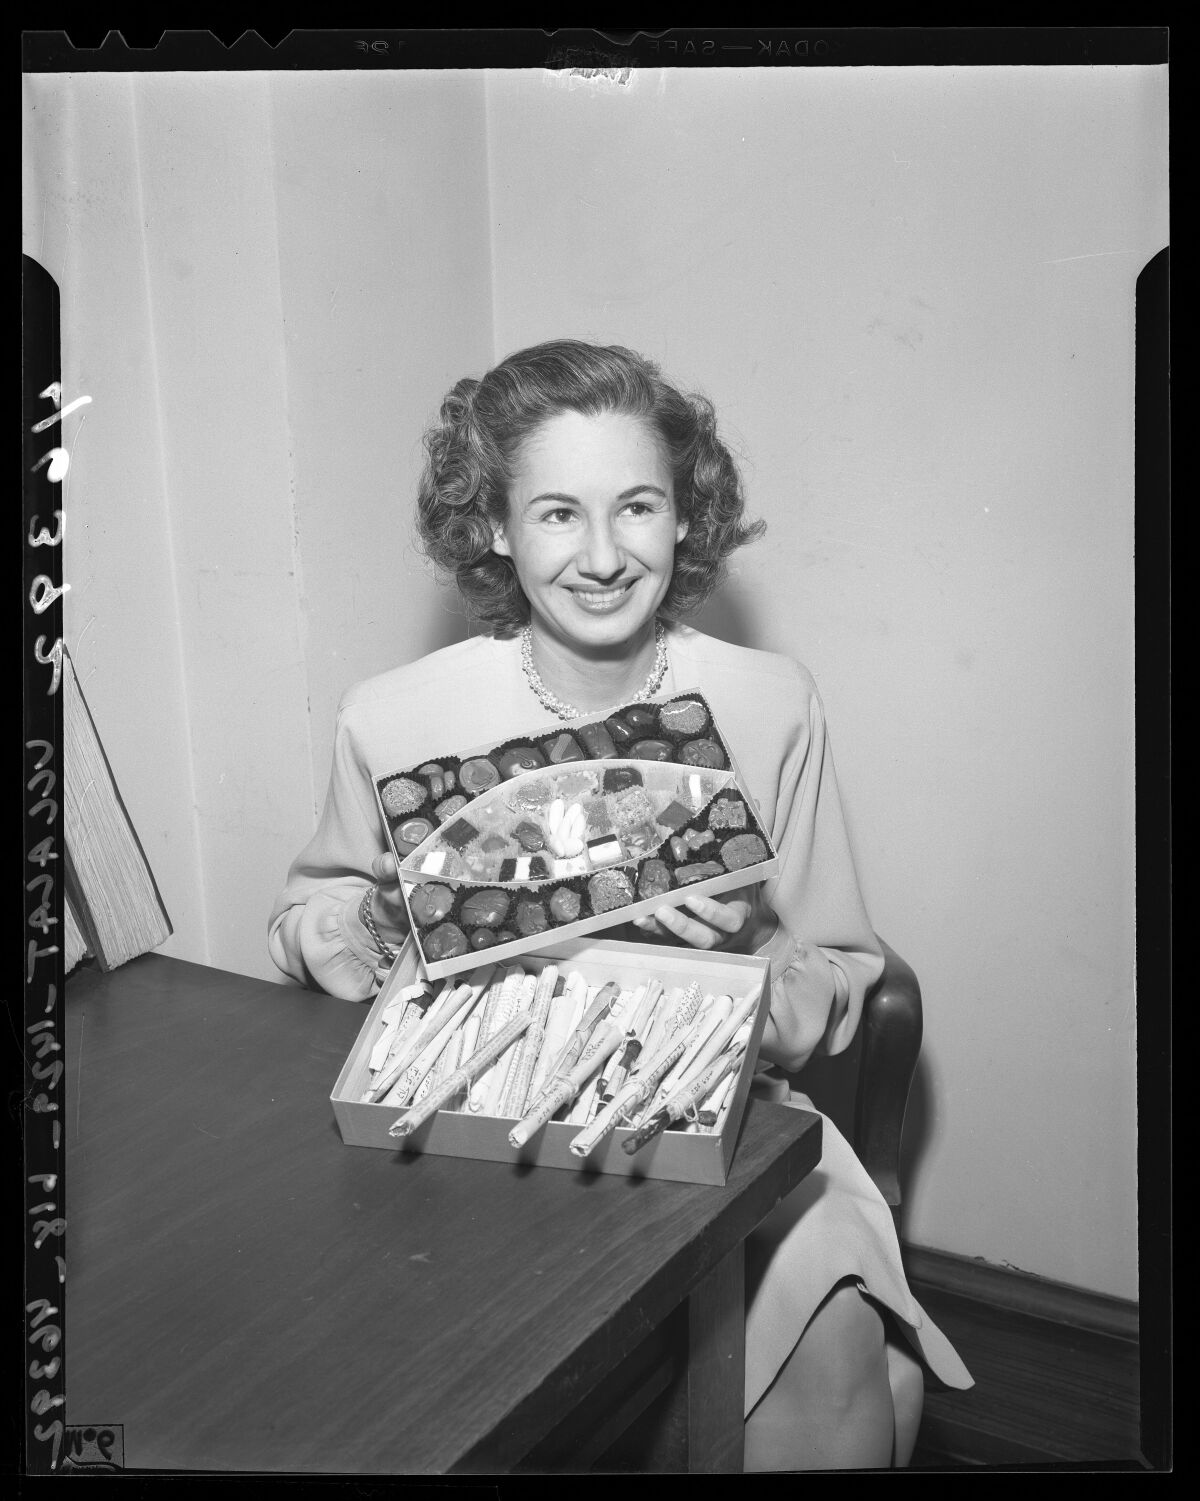 A 1940s woman smiles and holds a tray of candy to reveal opium underneath.